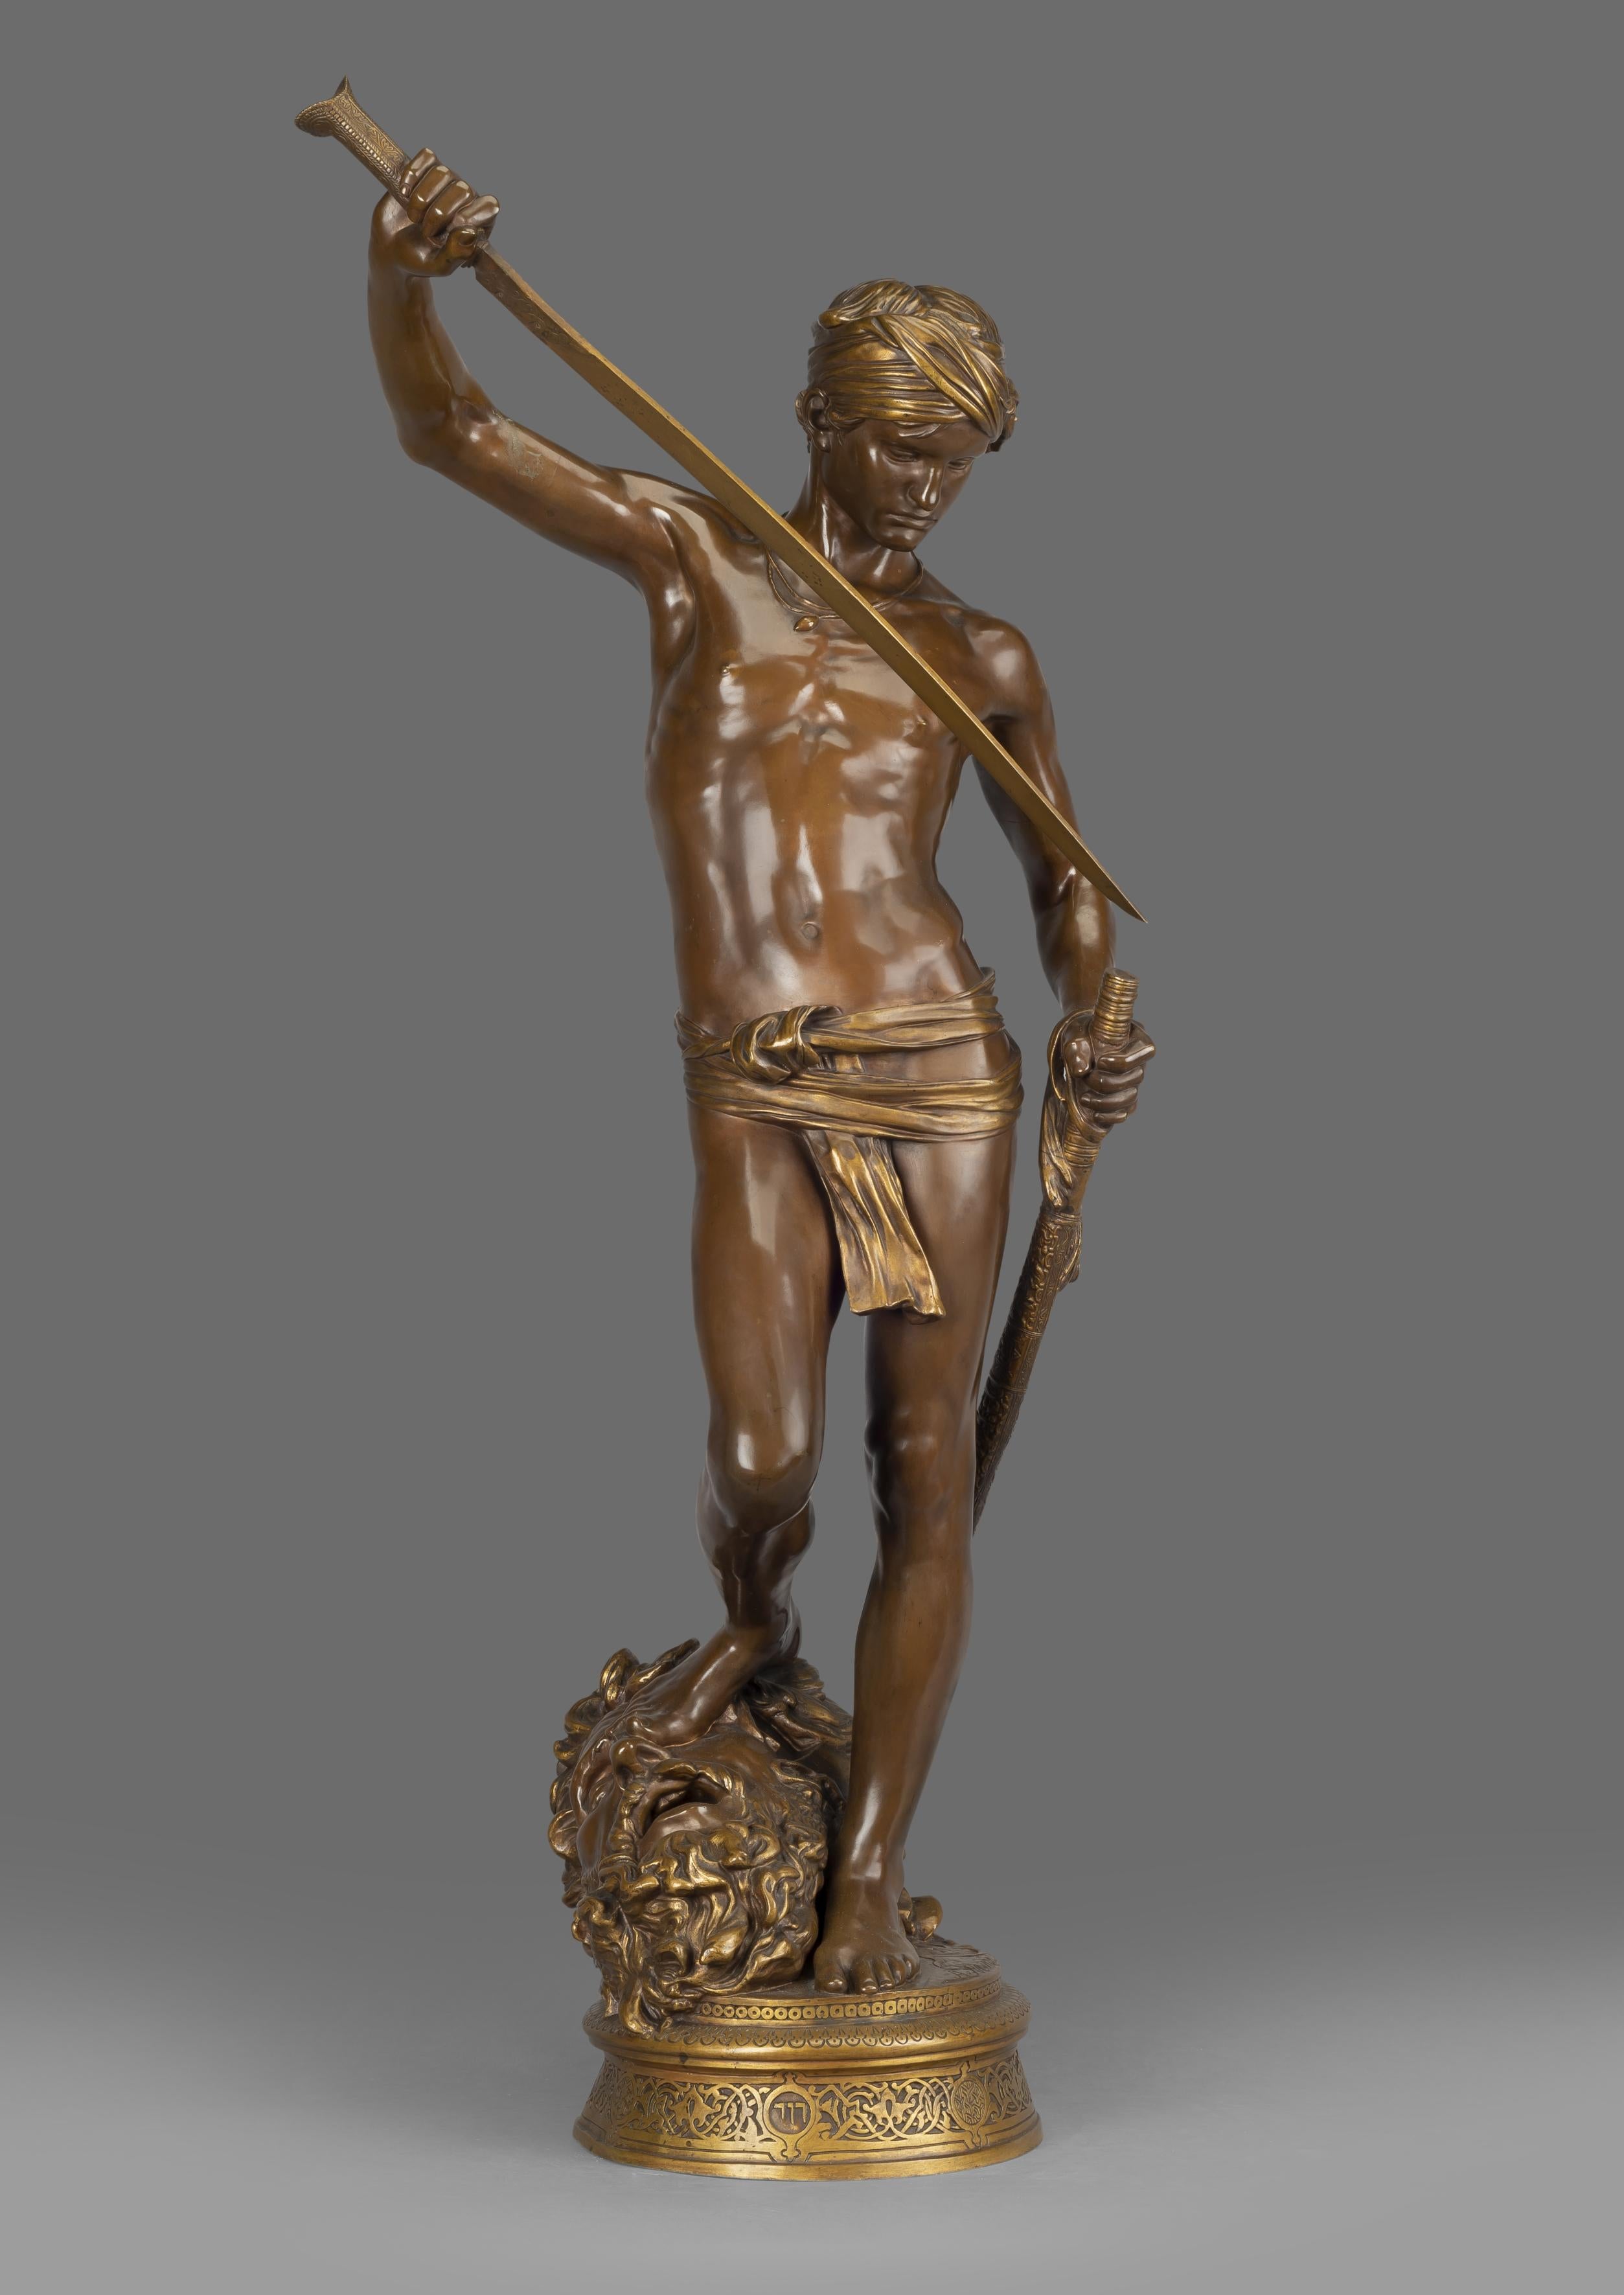 'David Vainqueur de Goliath' - A fine Patinated bronze figure by Antonin Mercié, cast Ferdinand Barbedienne.

French, circa 1880. 

Rich brown patiantion with gold highlights, the base cast with a lozenge with the Hebrew for David and the base